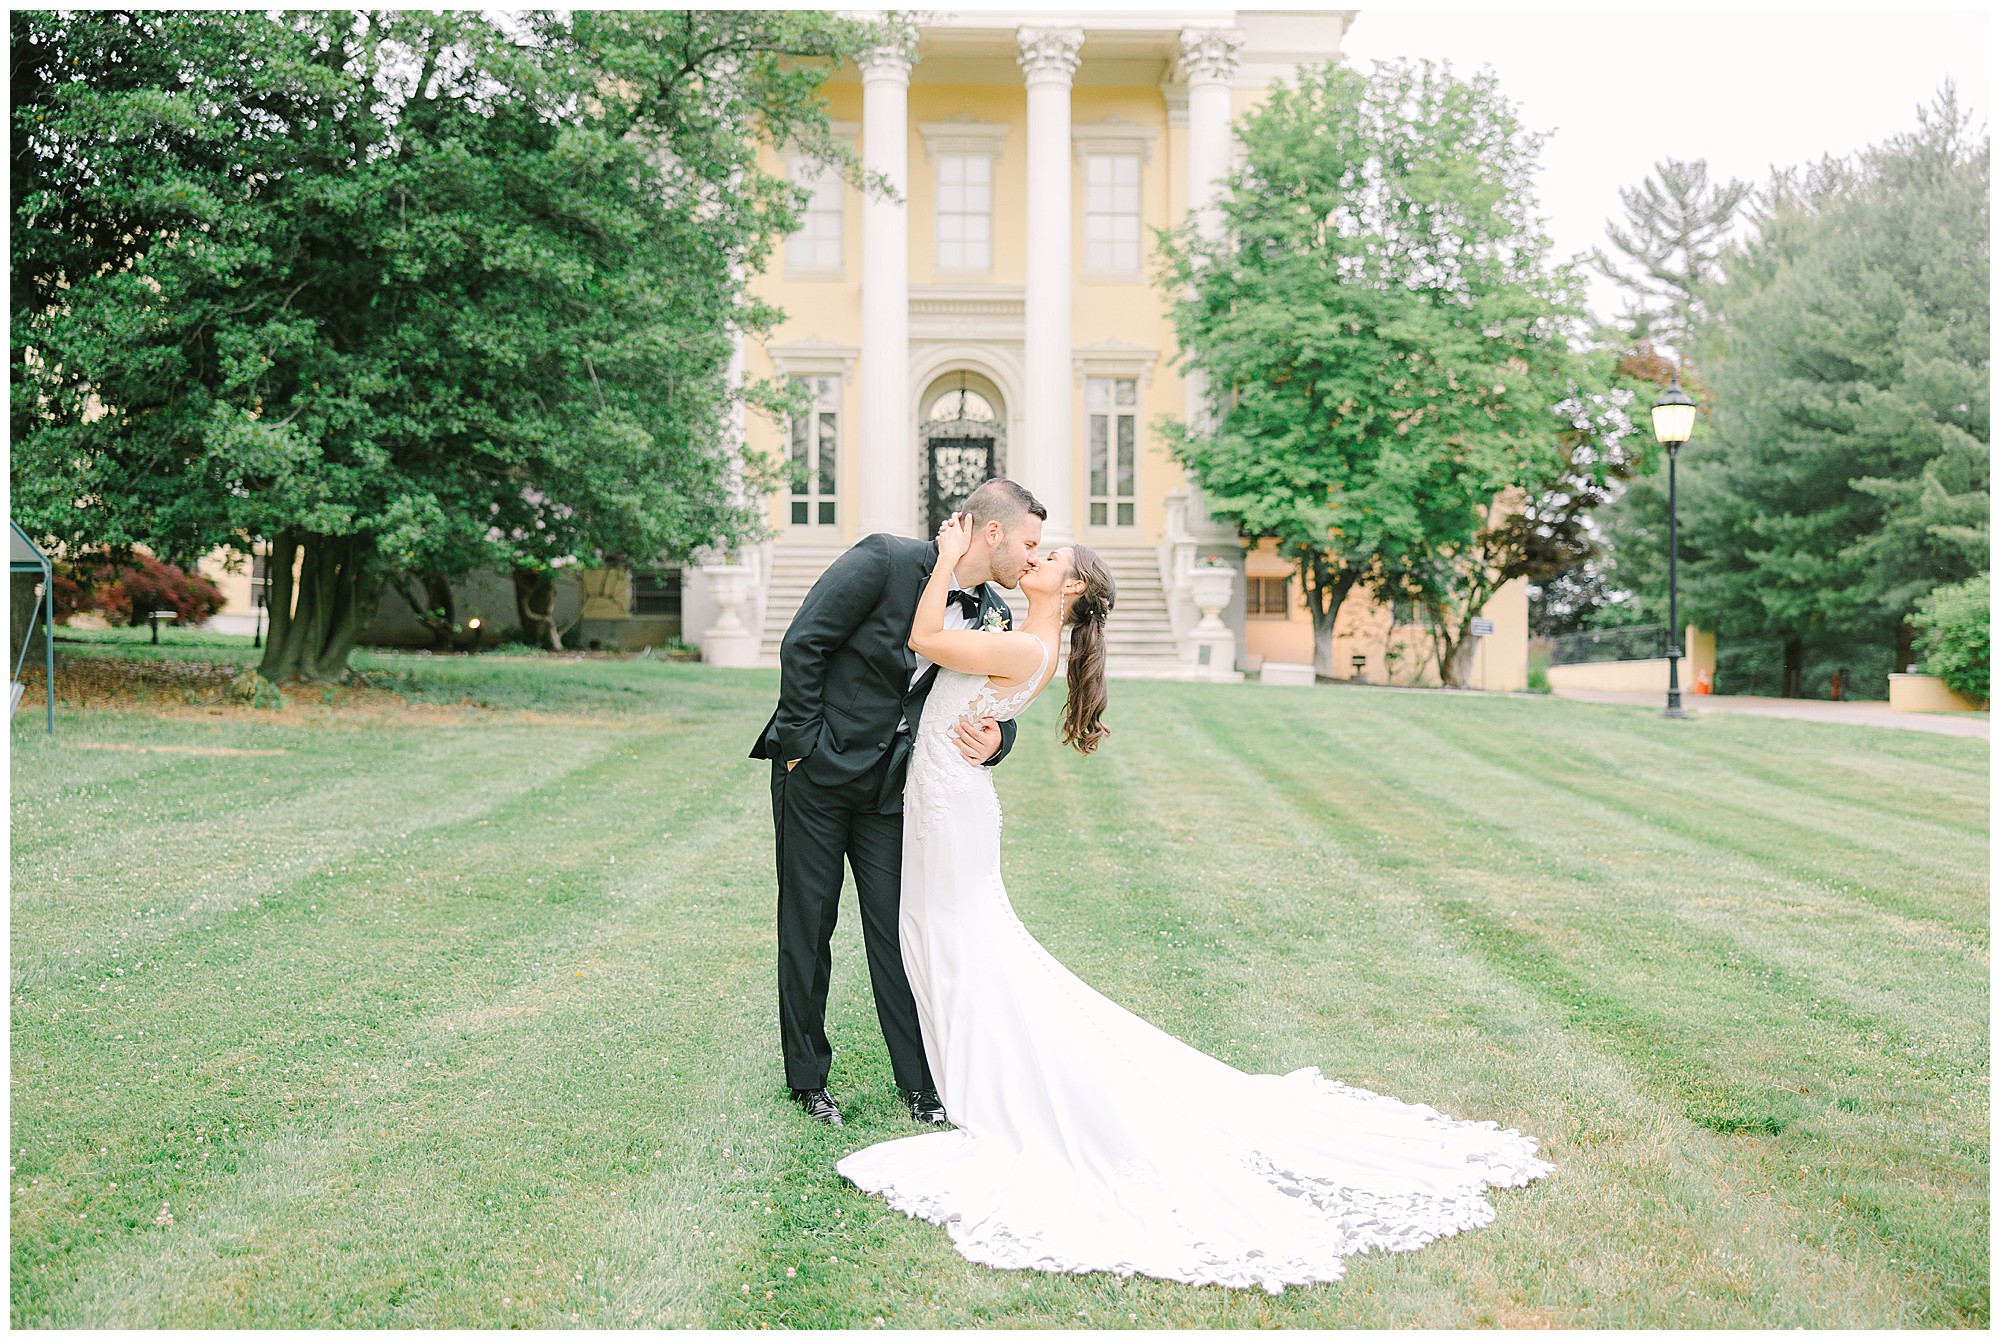 Evergreen Museum & Library Wedding in Baltimore Maryland - Chesapeake Charm Photography